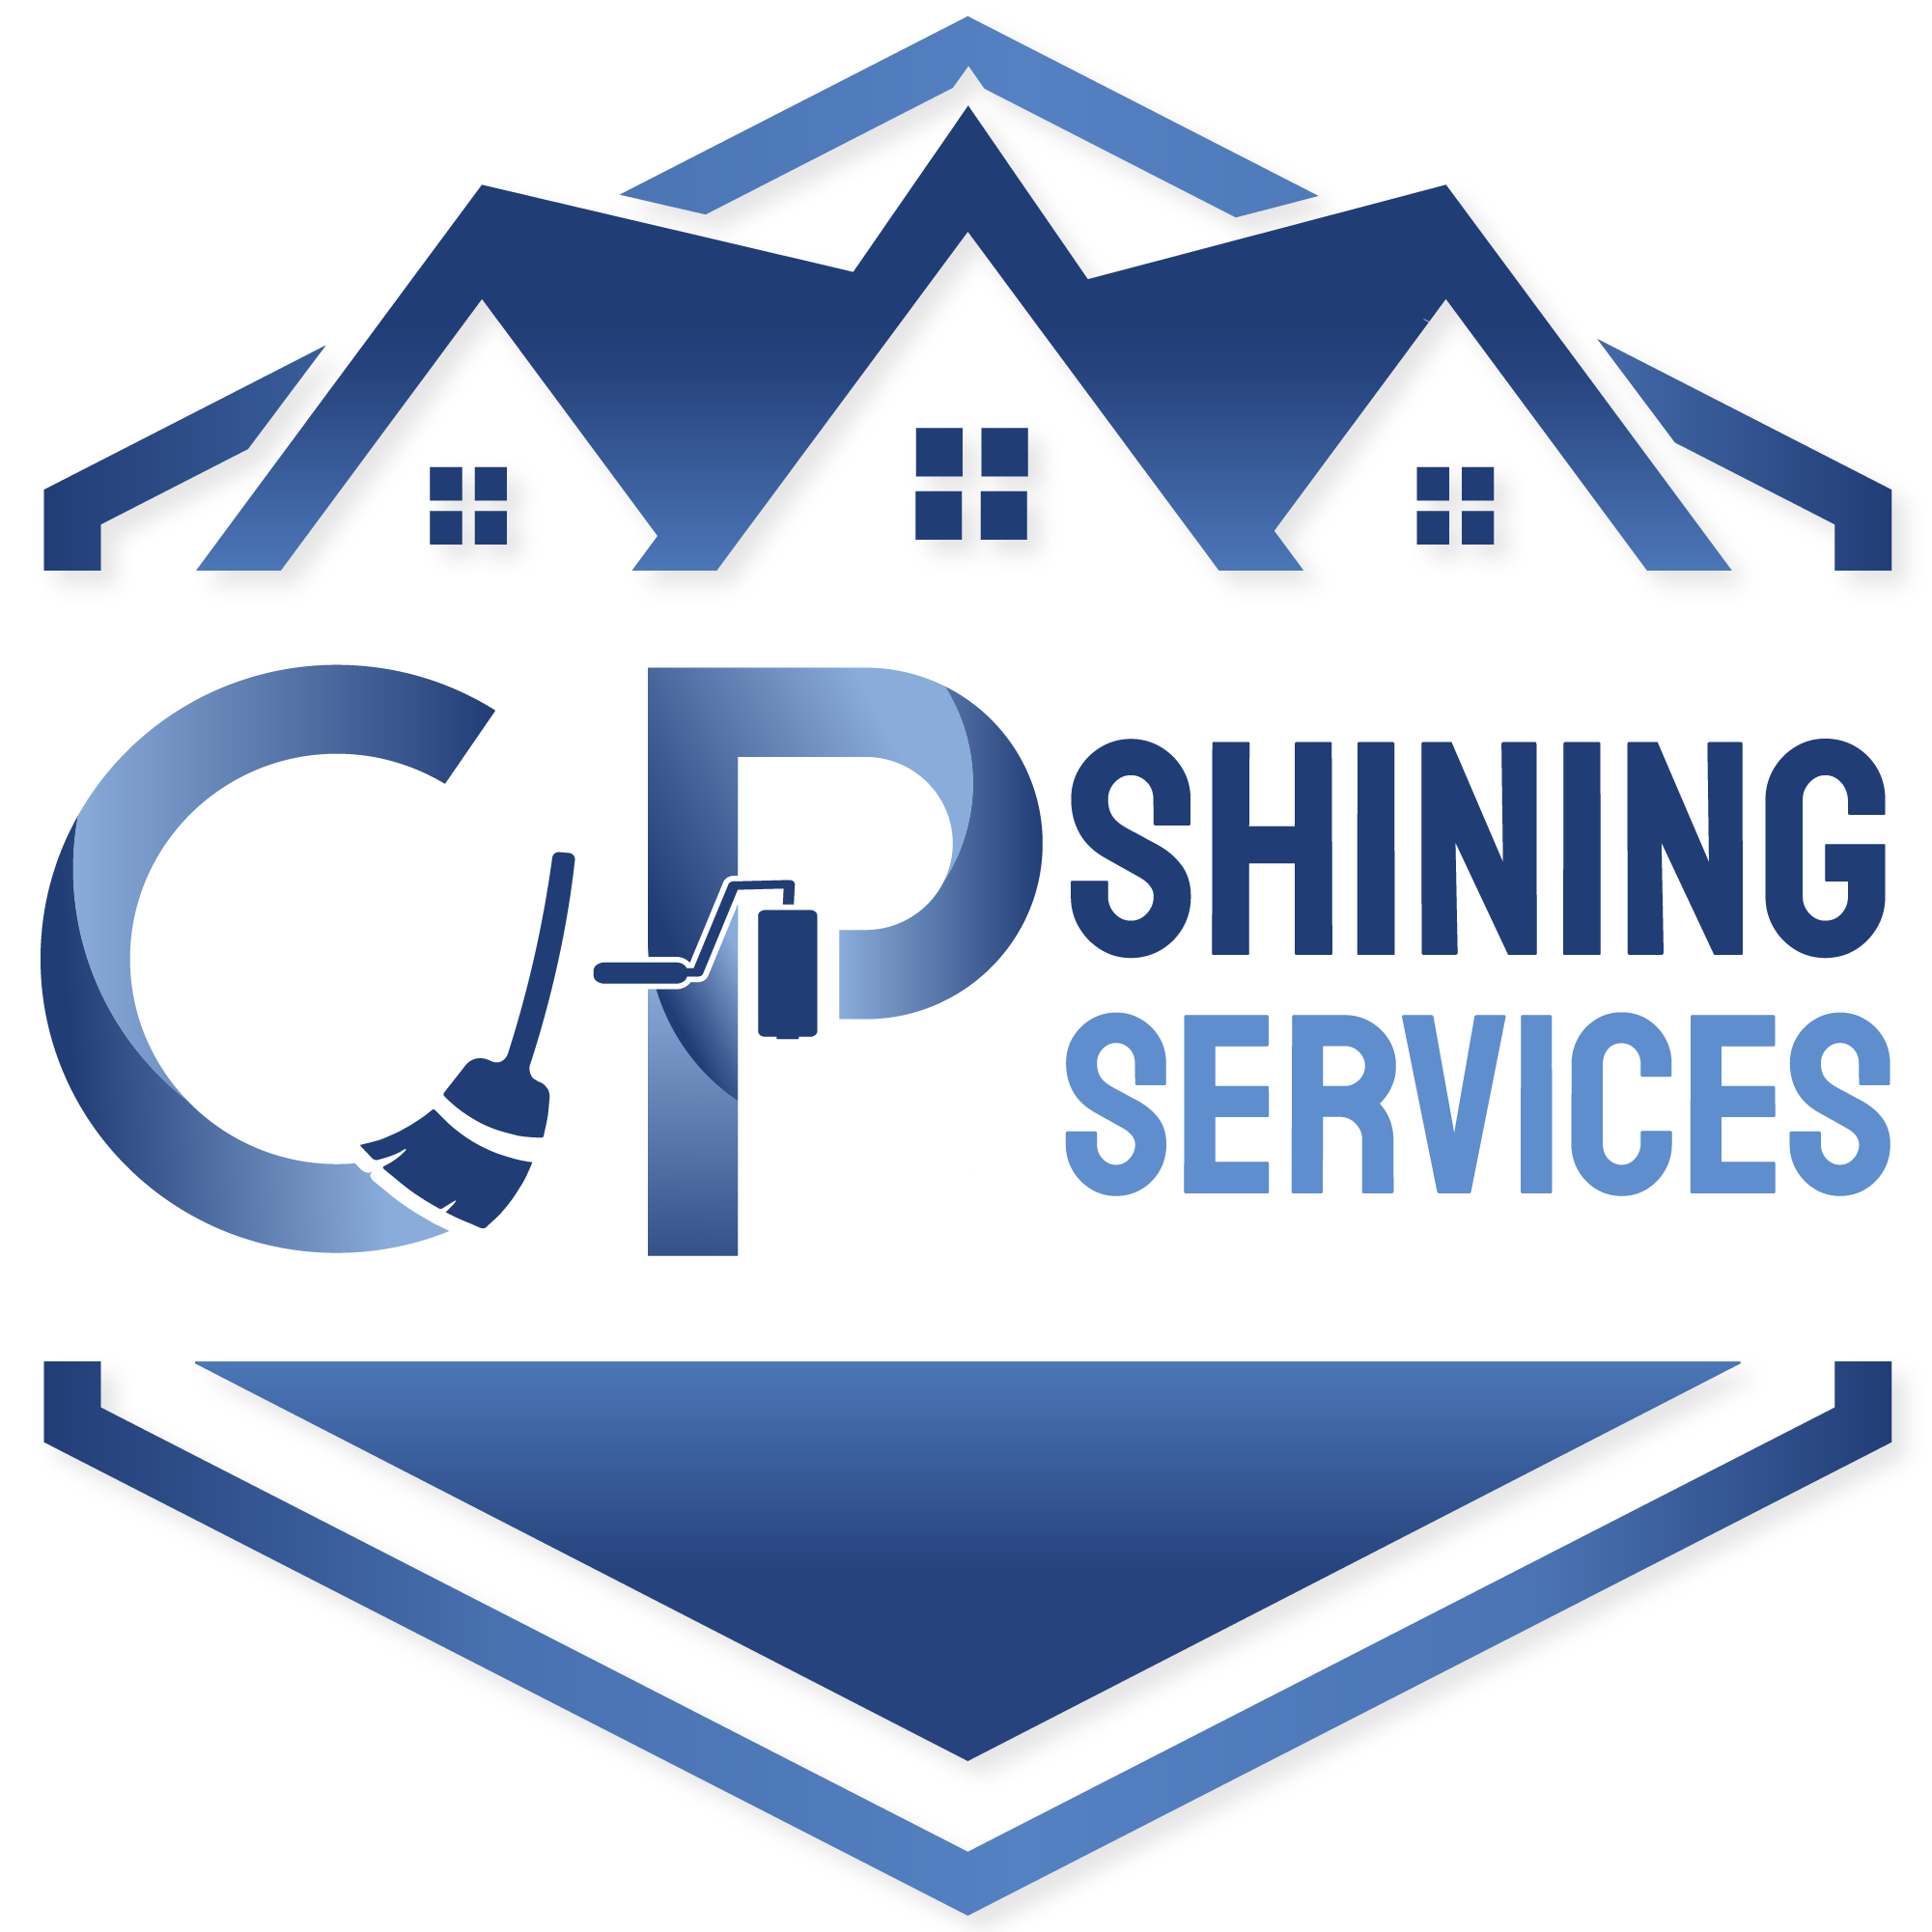 Contact Us - CP Shining Services